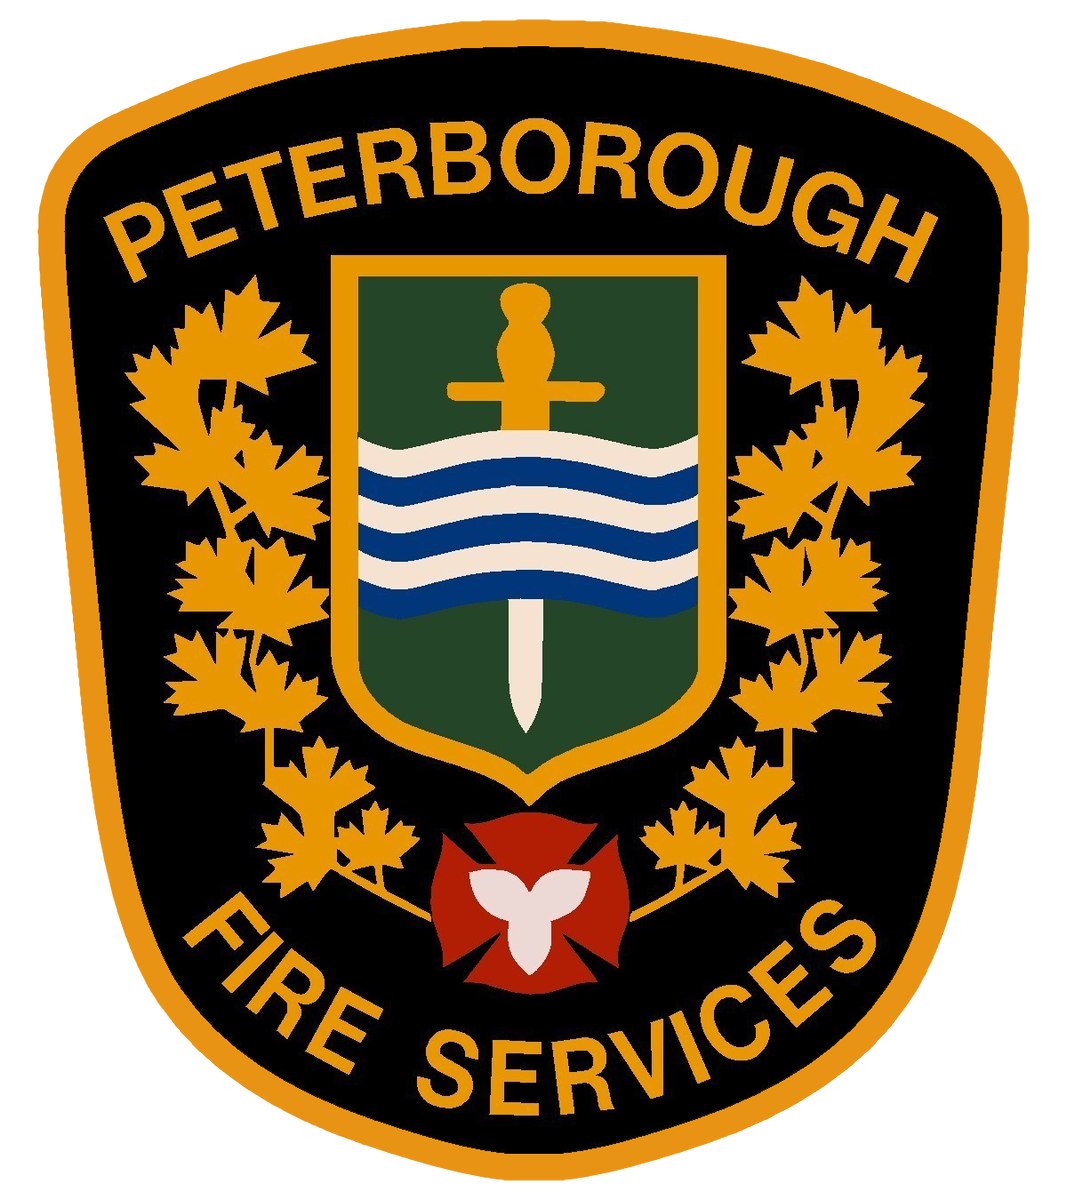 Police are warning of a bogus door-to-door canvasser seeking donations for Peterborough Fire Services.